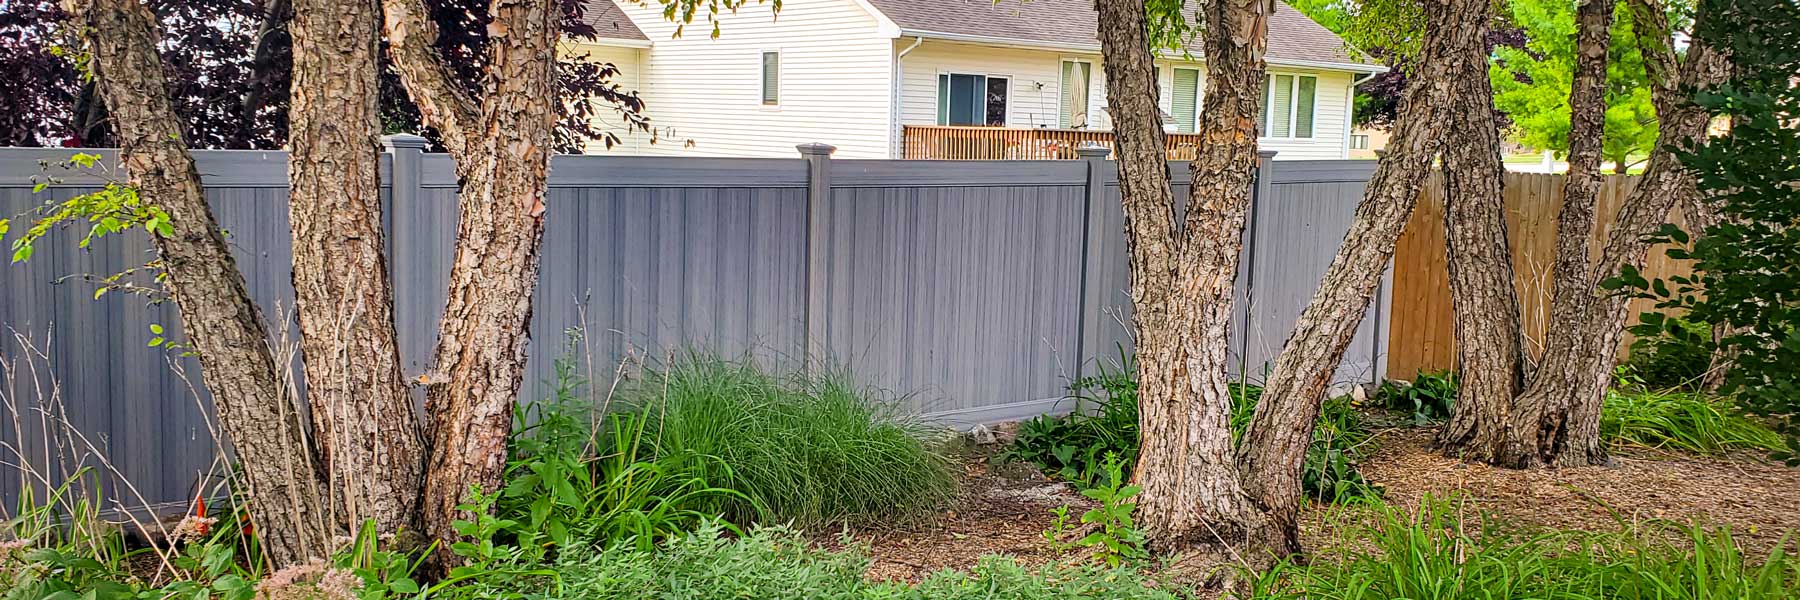 Cedar Rapids fence company residential fence contractors Iowa board on board shadow box picket alternating staggered wood vinyl tan sandstone white sandstone khaki cracking chipping splitting UVB residential backyard perimeter security visibility solid 